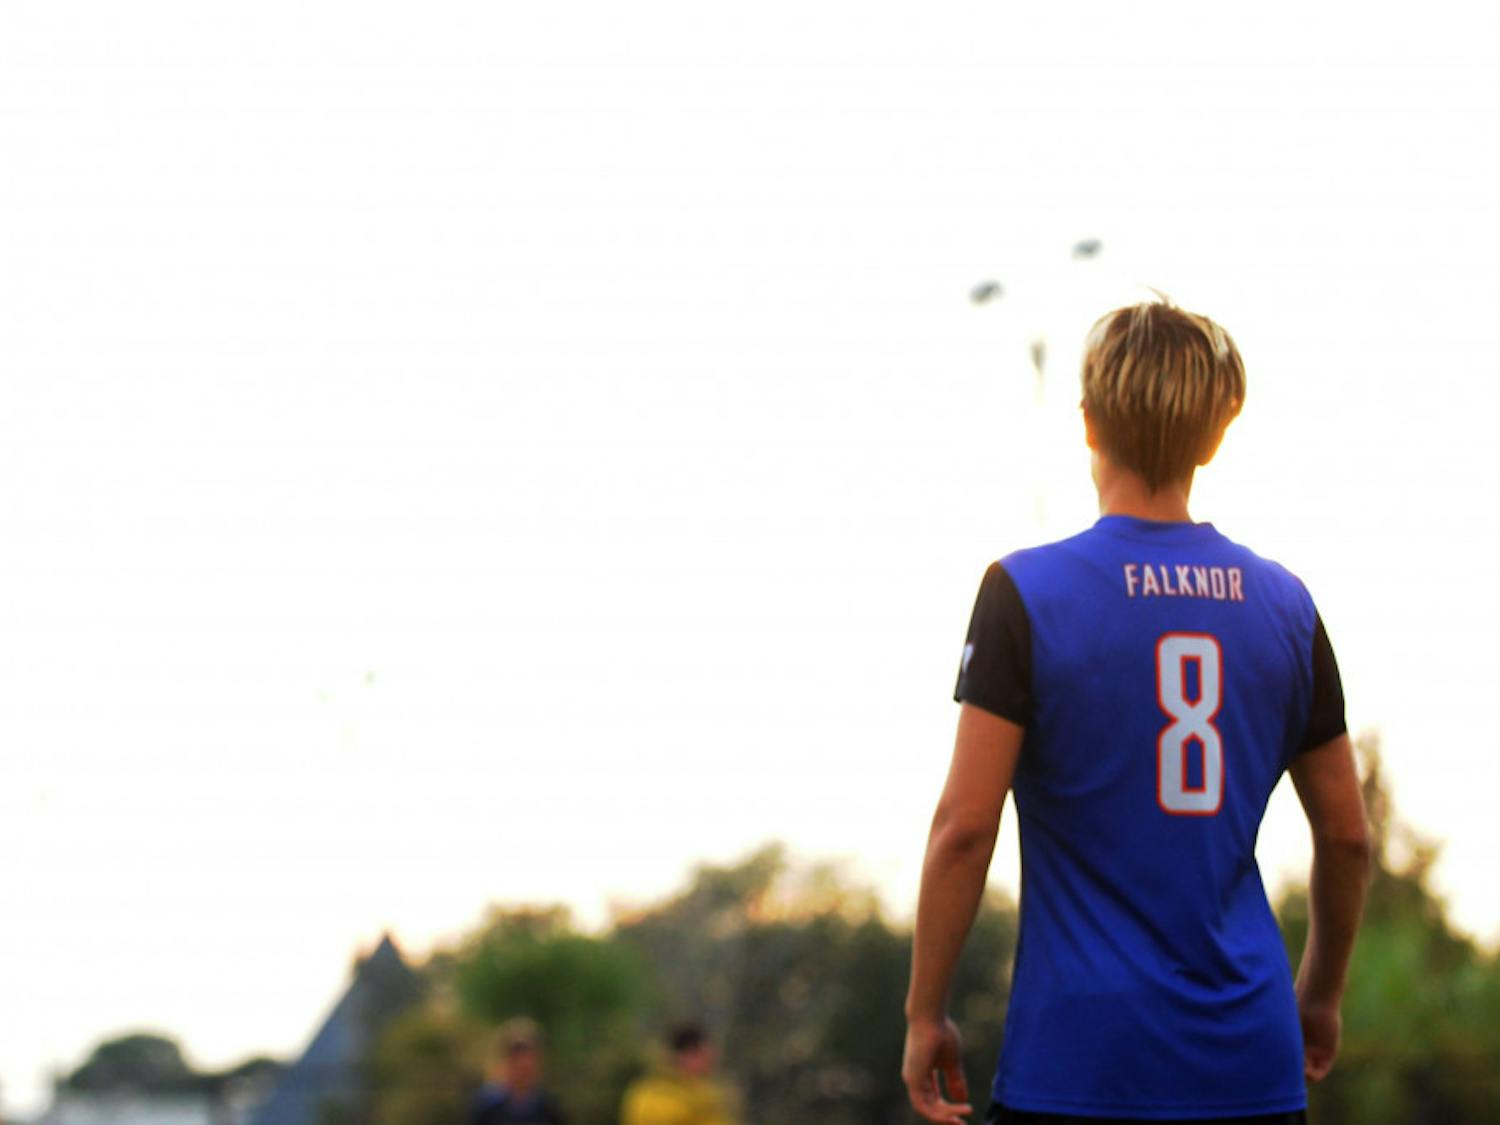 UF defender Claire Falknor waits for the start of the second period during Florida's 2-1 win against Troy in an exhibition match on Aug. 11, 2015, at the soccer practice field at Donald R. Dizney Stadium.